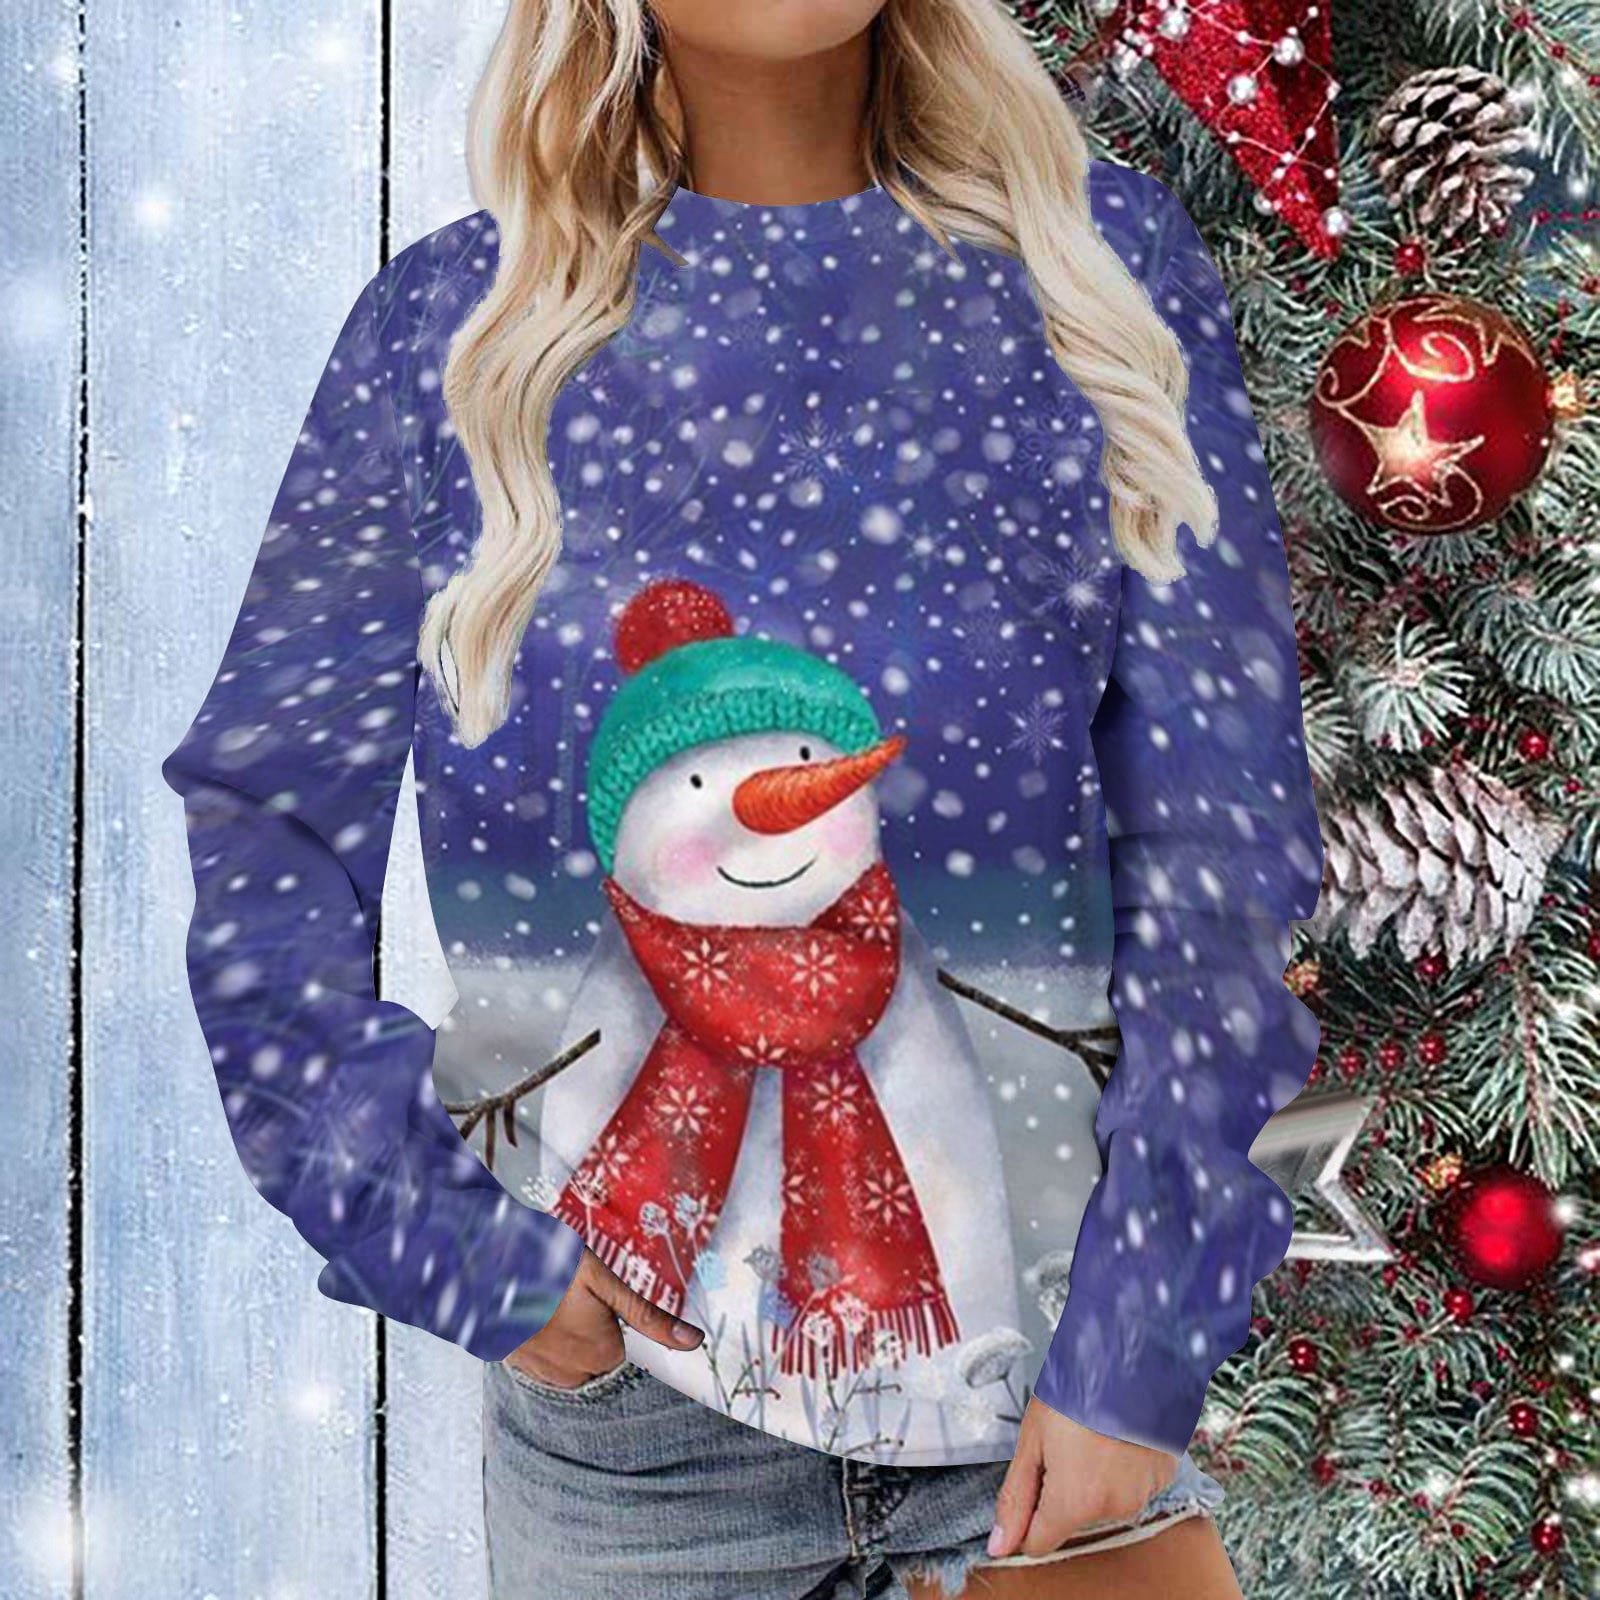 Ollysqiar Christmas Women And Men Long Sleeve Deer Printed Hoodies  Drawstring,add on items,cheap stuff under 10 dollars,cosas gratis,prime  deals of the day today only clearance